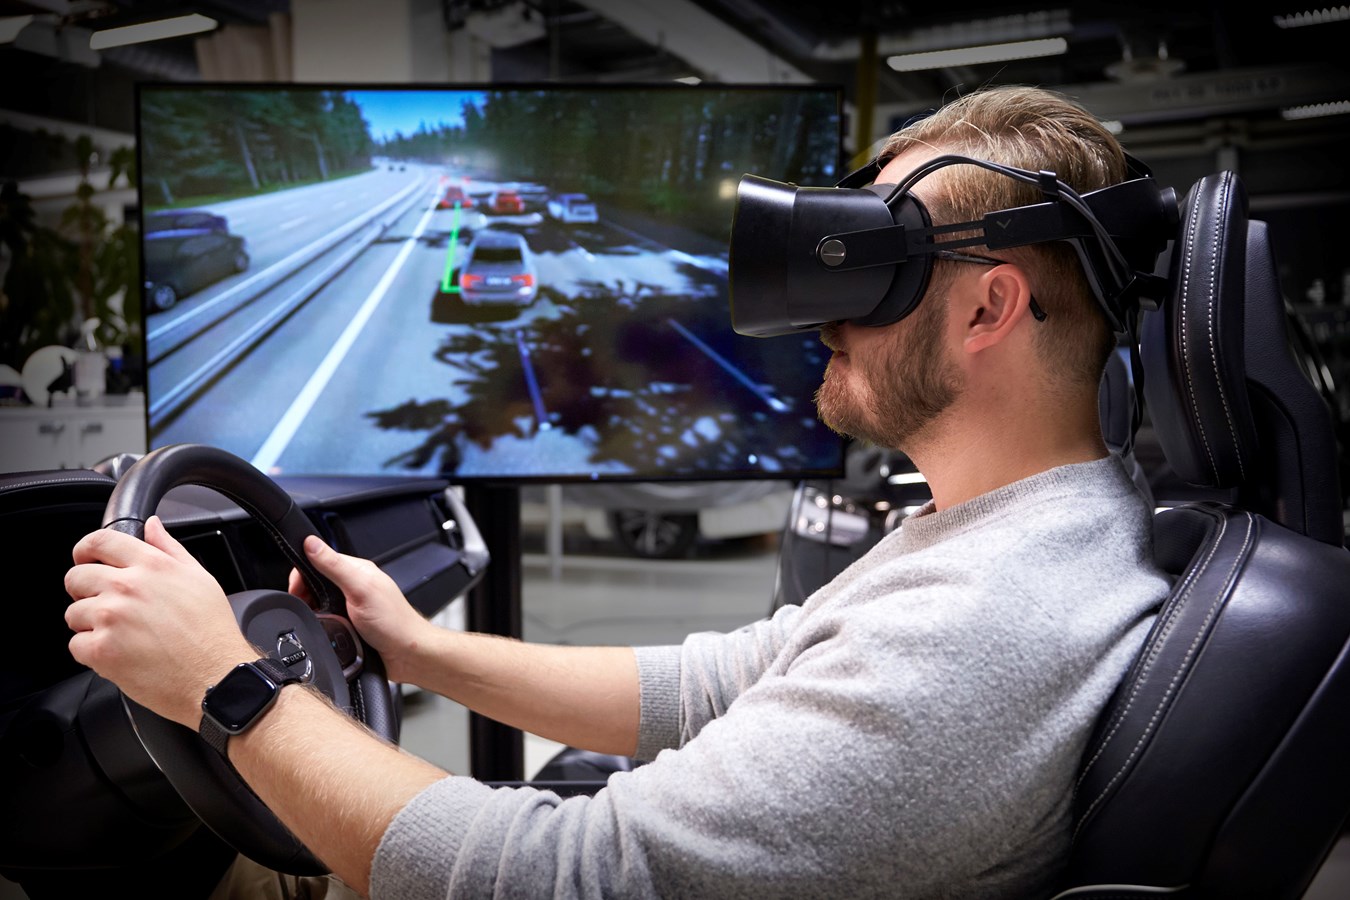 Volvo Cars “ultimate driving simulator” uses latest gaming technology to develop safer cars